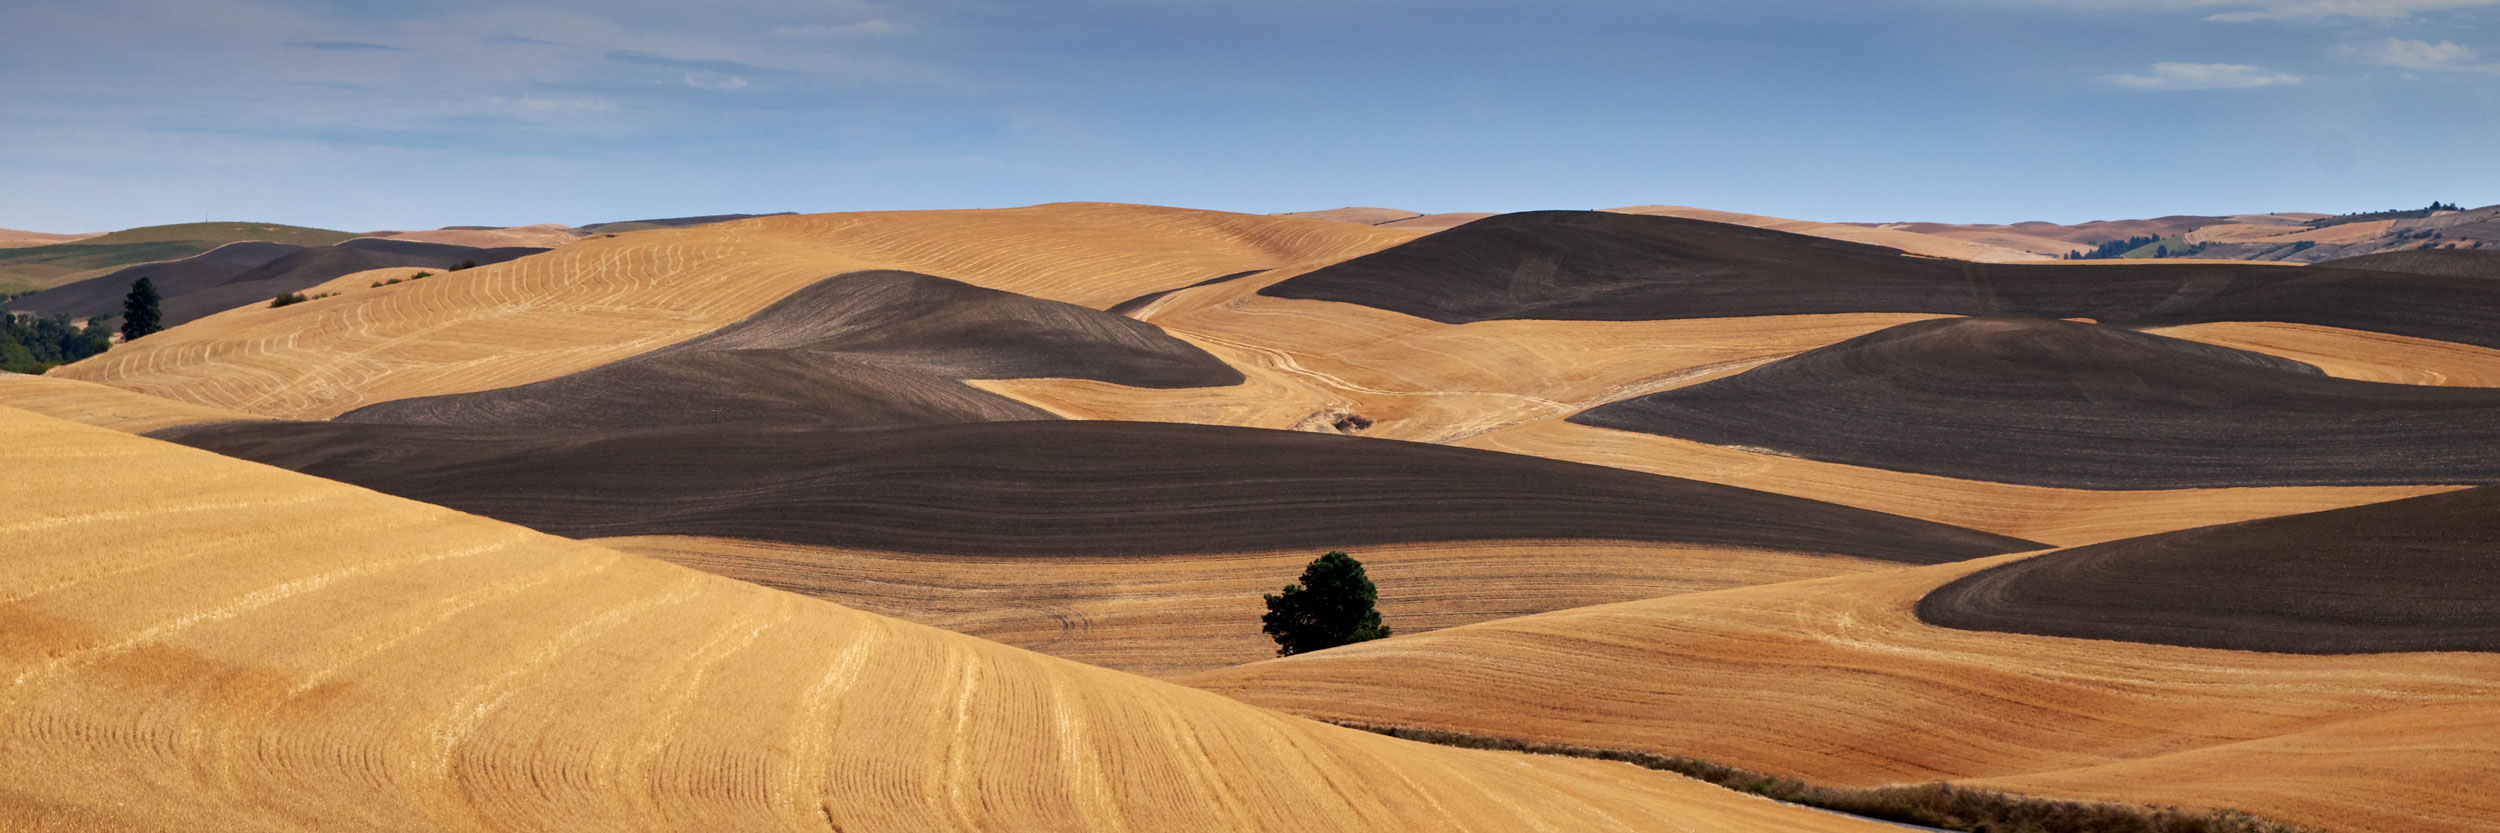 Rolling hills in the Palouse